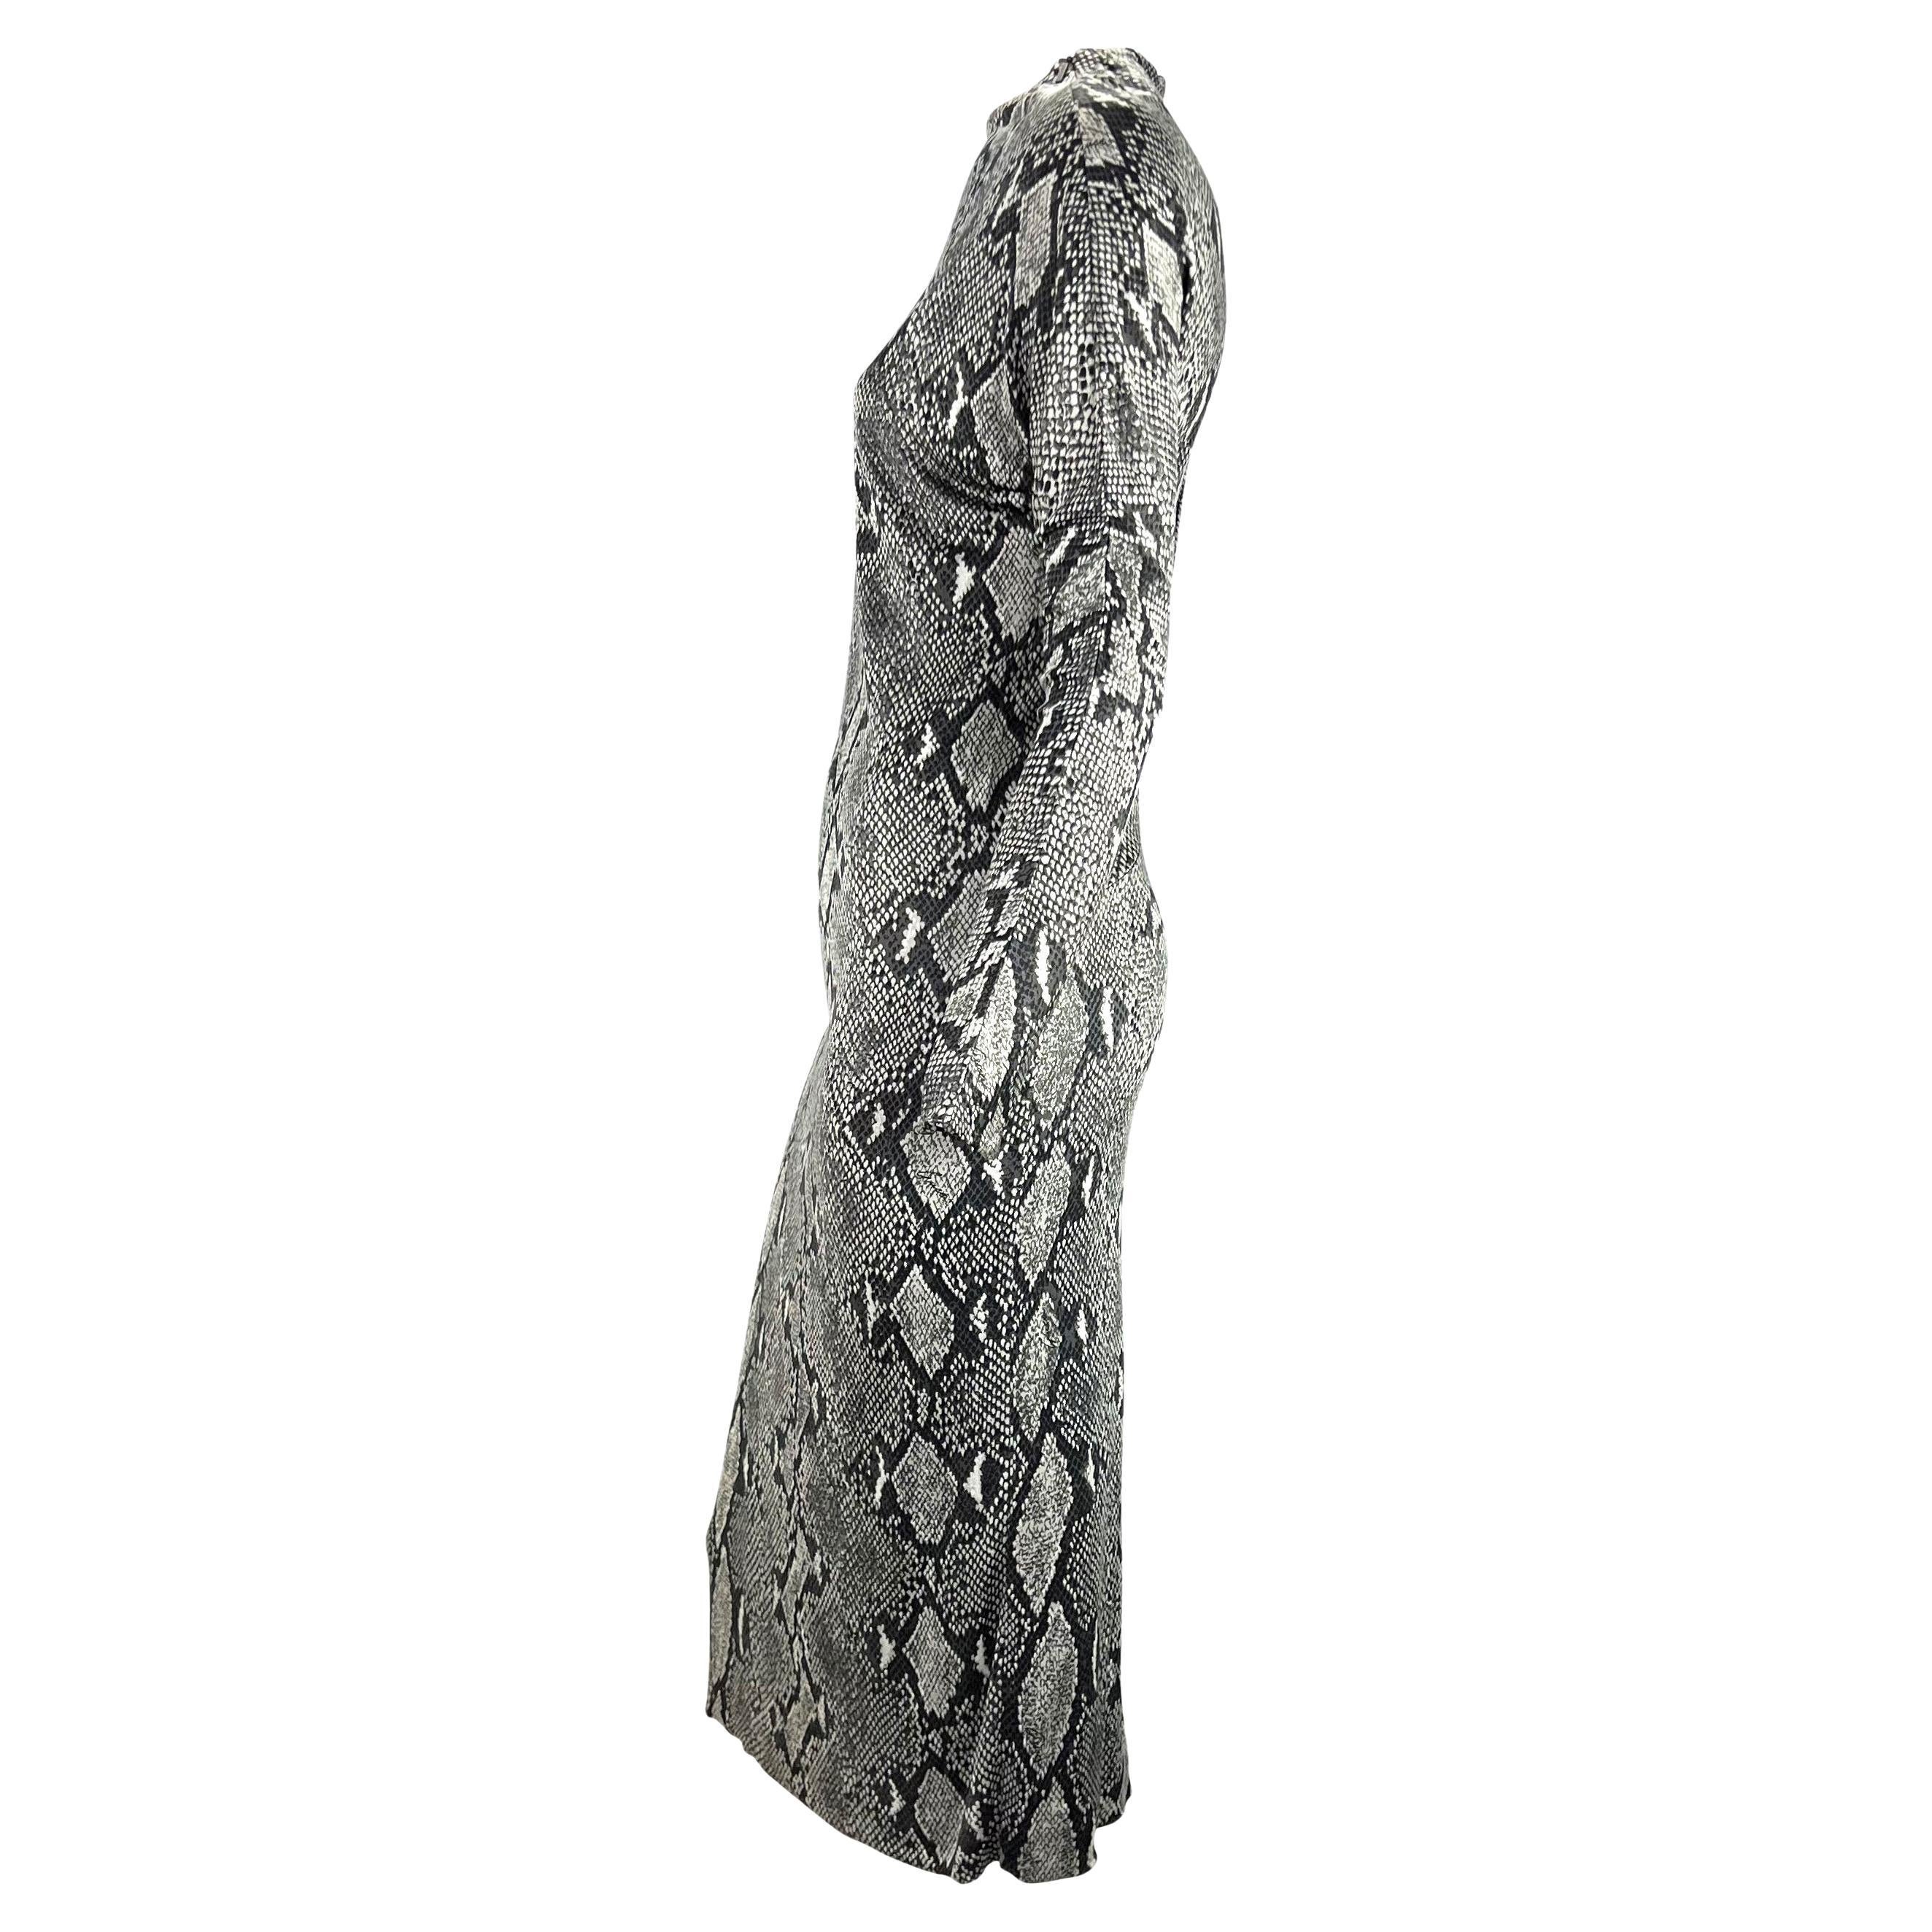 S/S 2000 Gucci by Tom Ford Grey Snake Print Asymmetric One Sleeve Dress For Sale 1